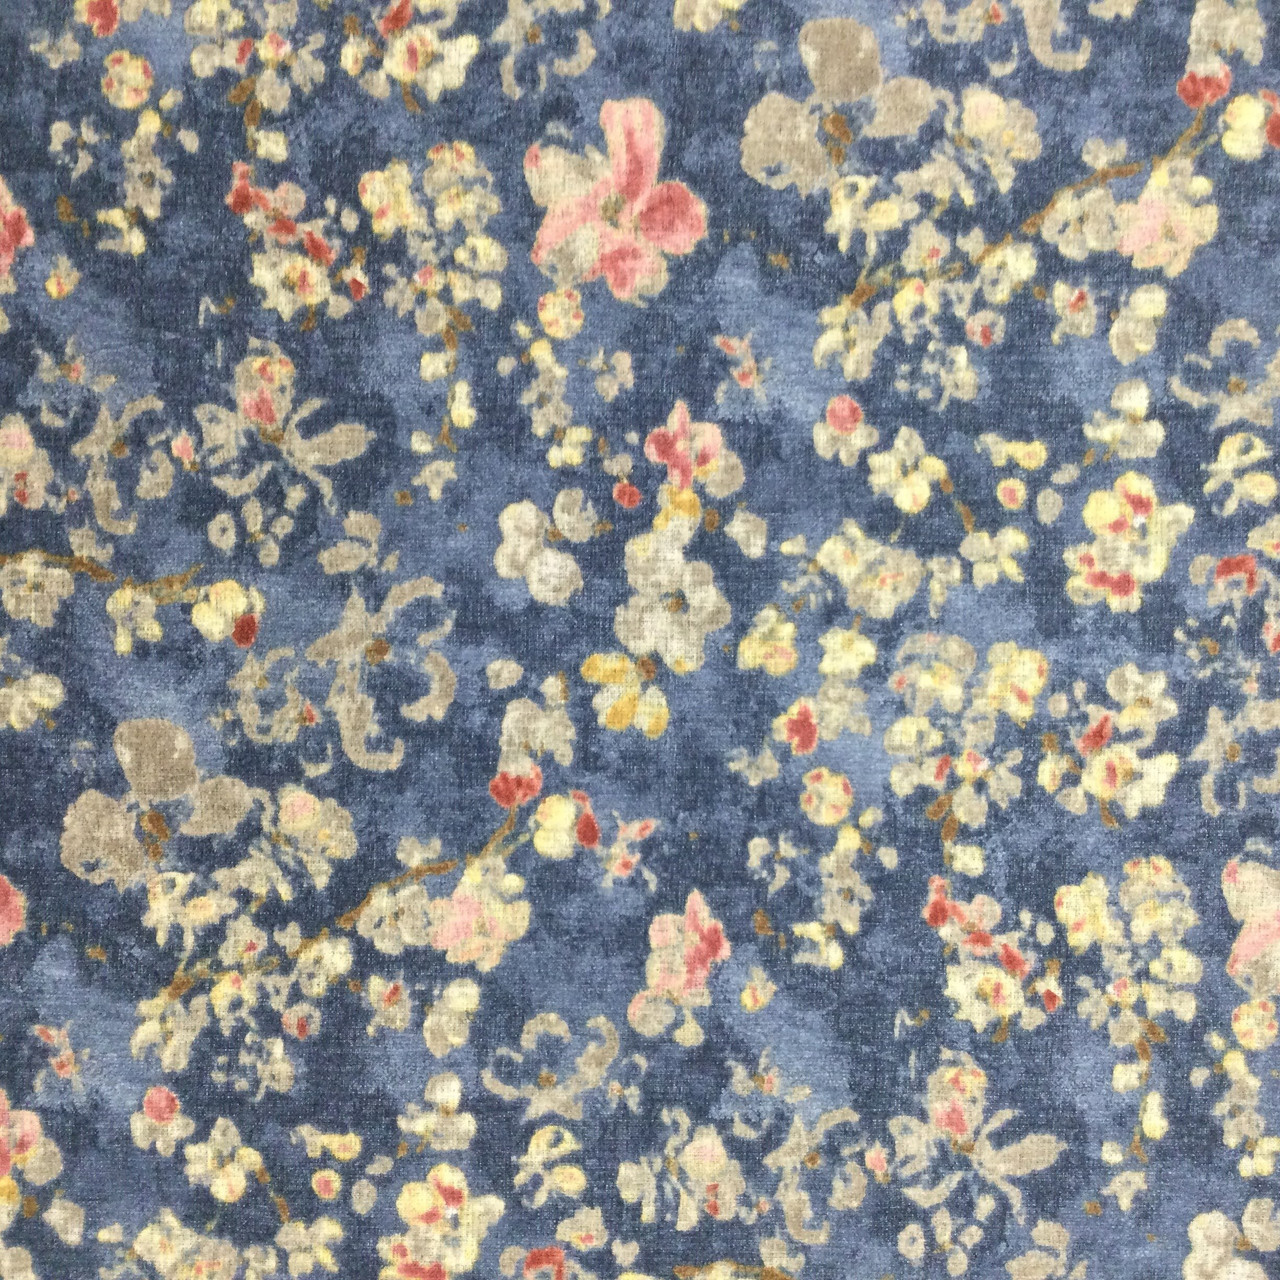 Vintage Fabric by the Yard, Natural Theme Floral Motifs with Fall Flowers  and Blossoms Patterns, Decorative Upholstery Fabric for Sofas and Home